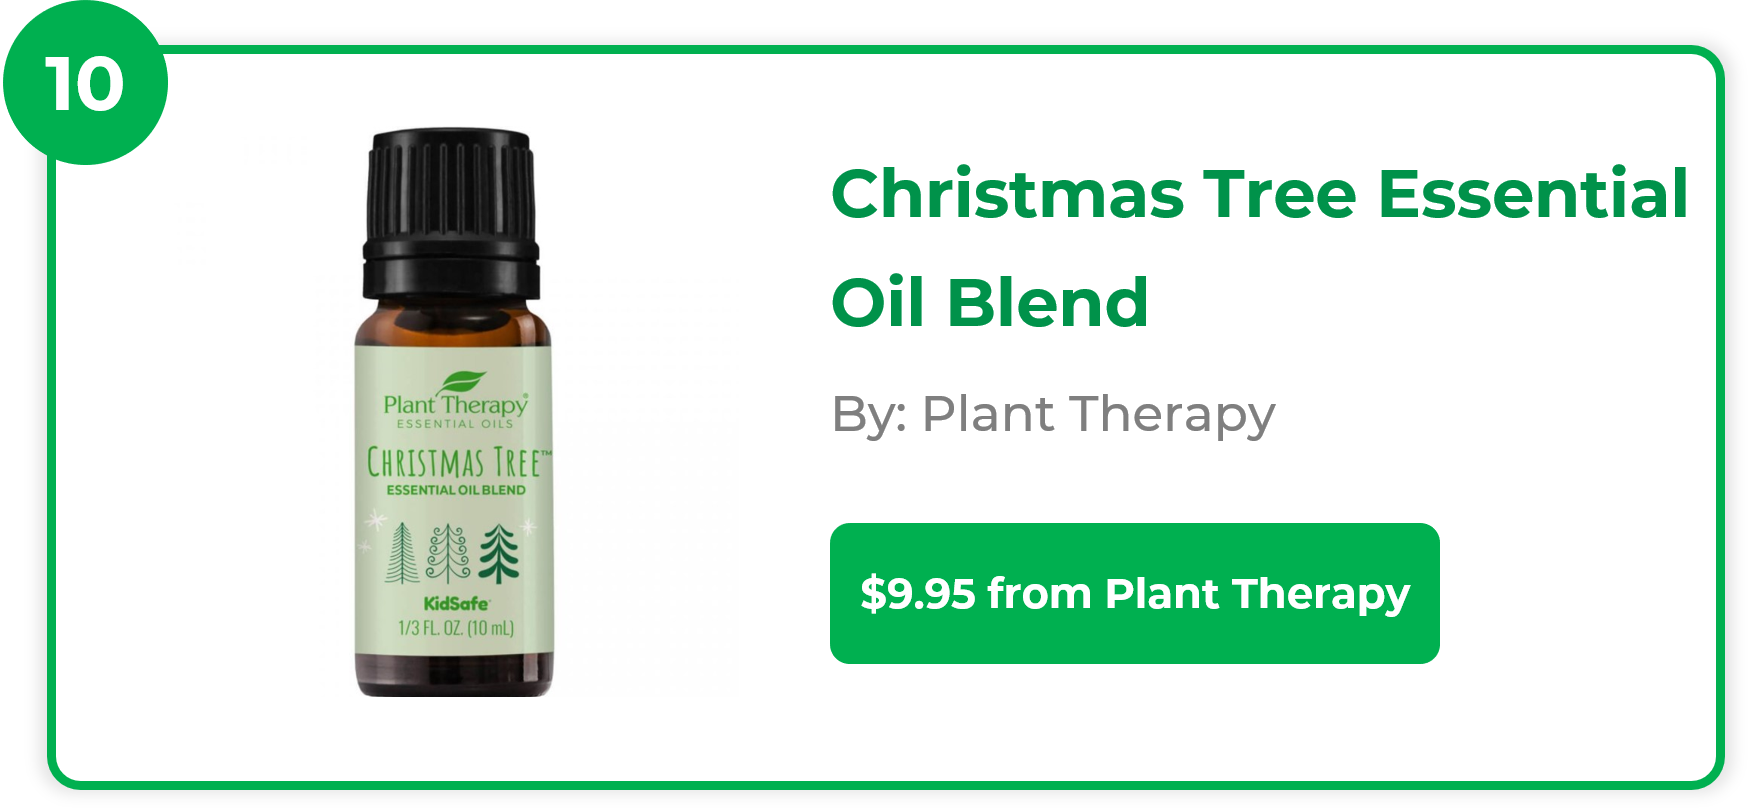 Christmas Tree Essential Oil Blend - Plant Therapy